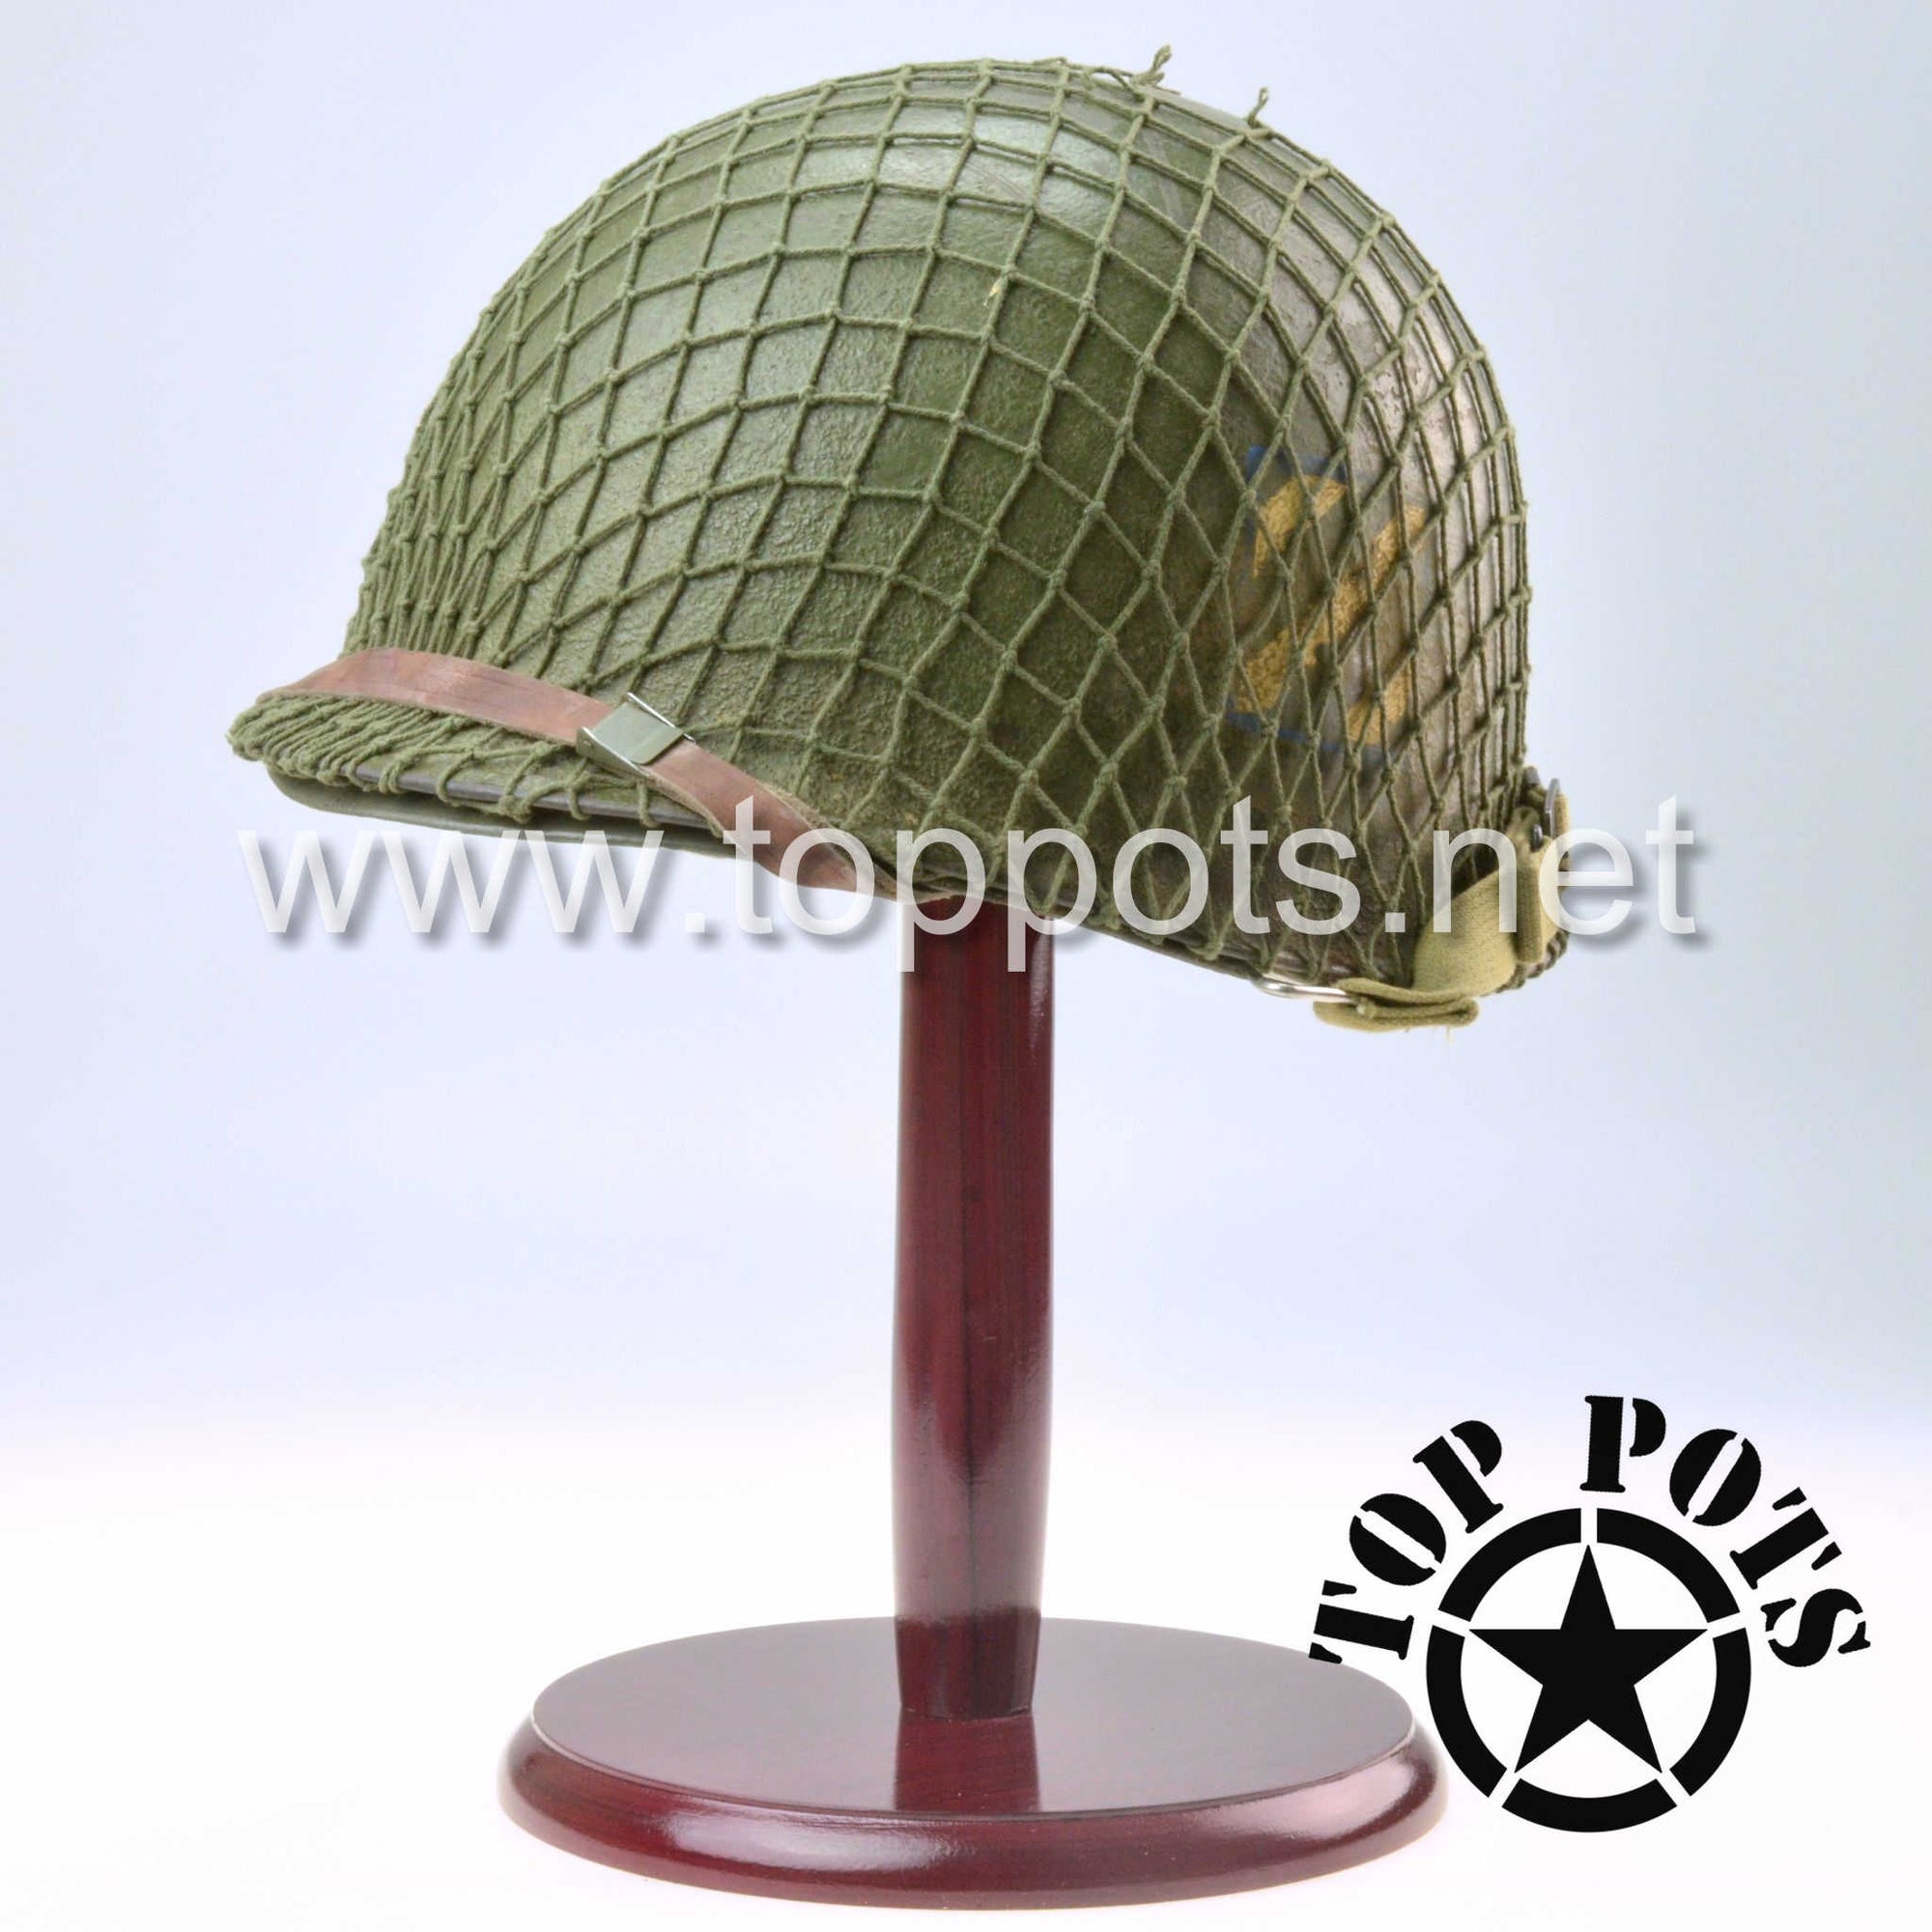 Featured Helmet - FIVE WWII US Army Aged Original M1 Infantry Helmet Swivel Bale Shells and Liners with 3rd Infantry Division Emblems, Nets & Display Stands (SET OF FIVE)